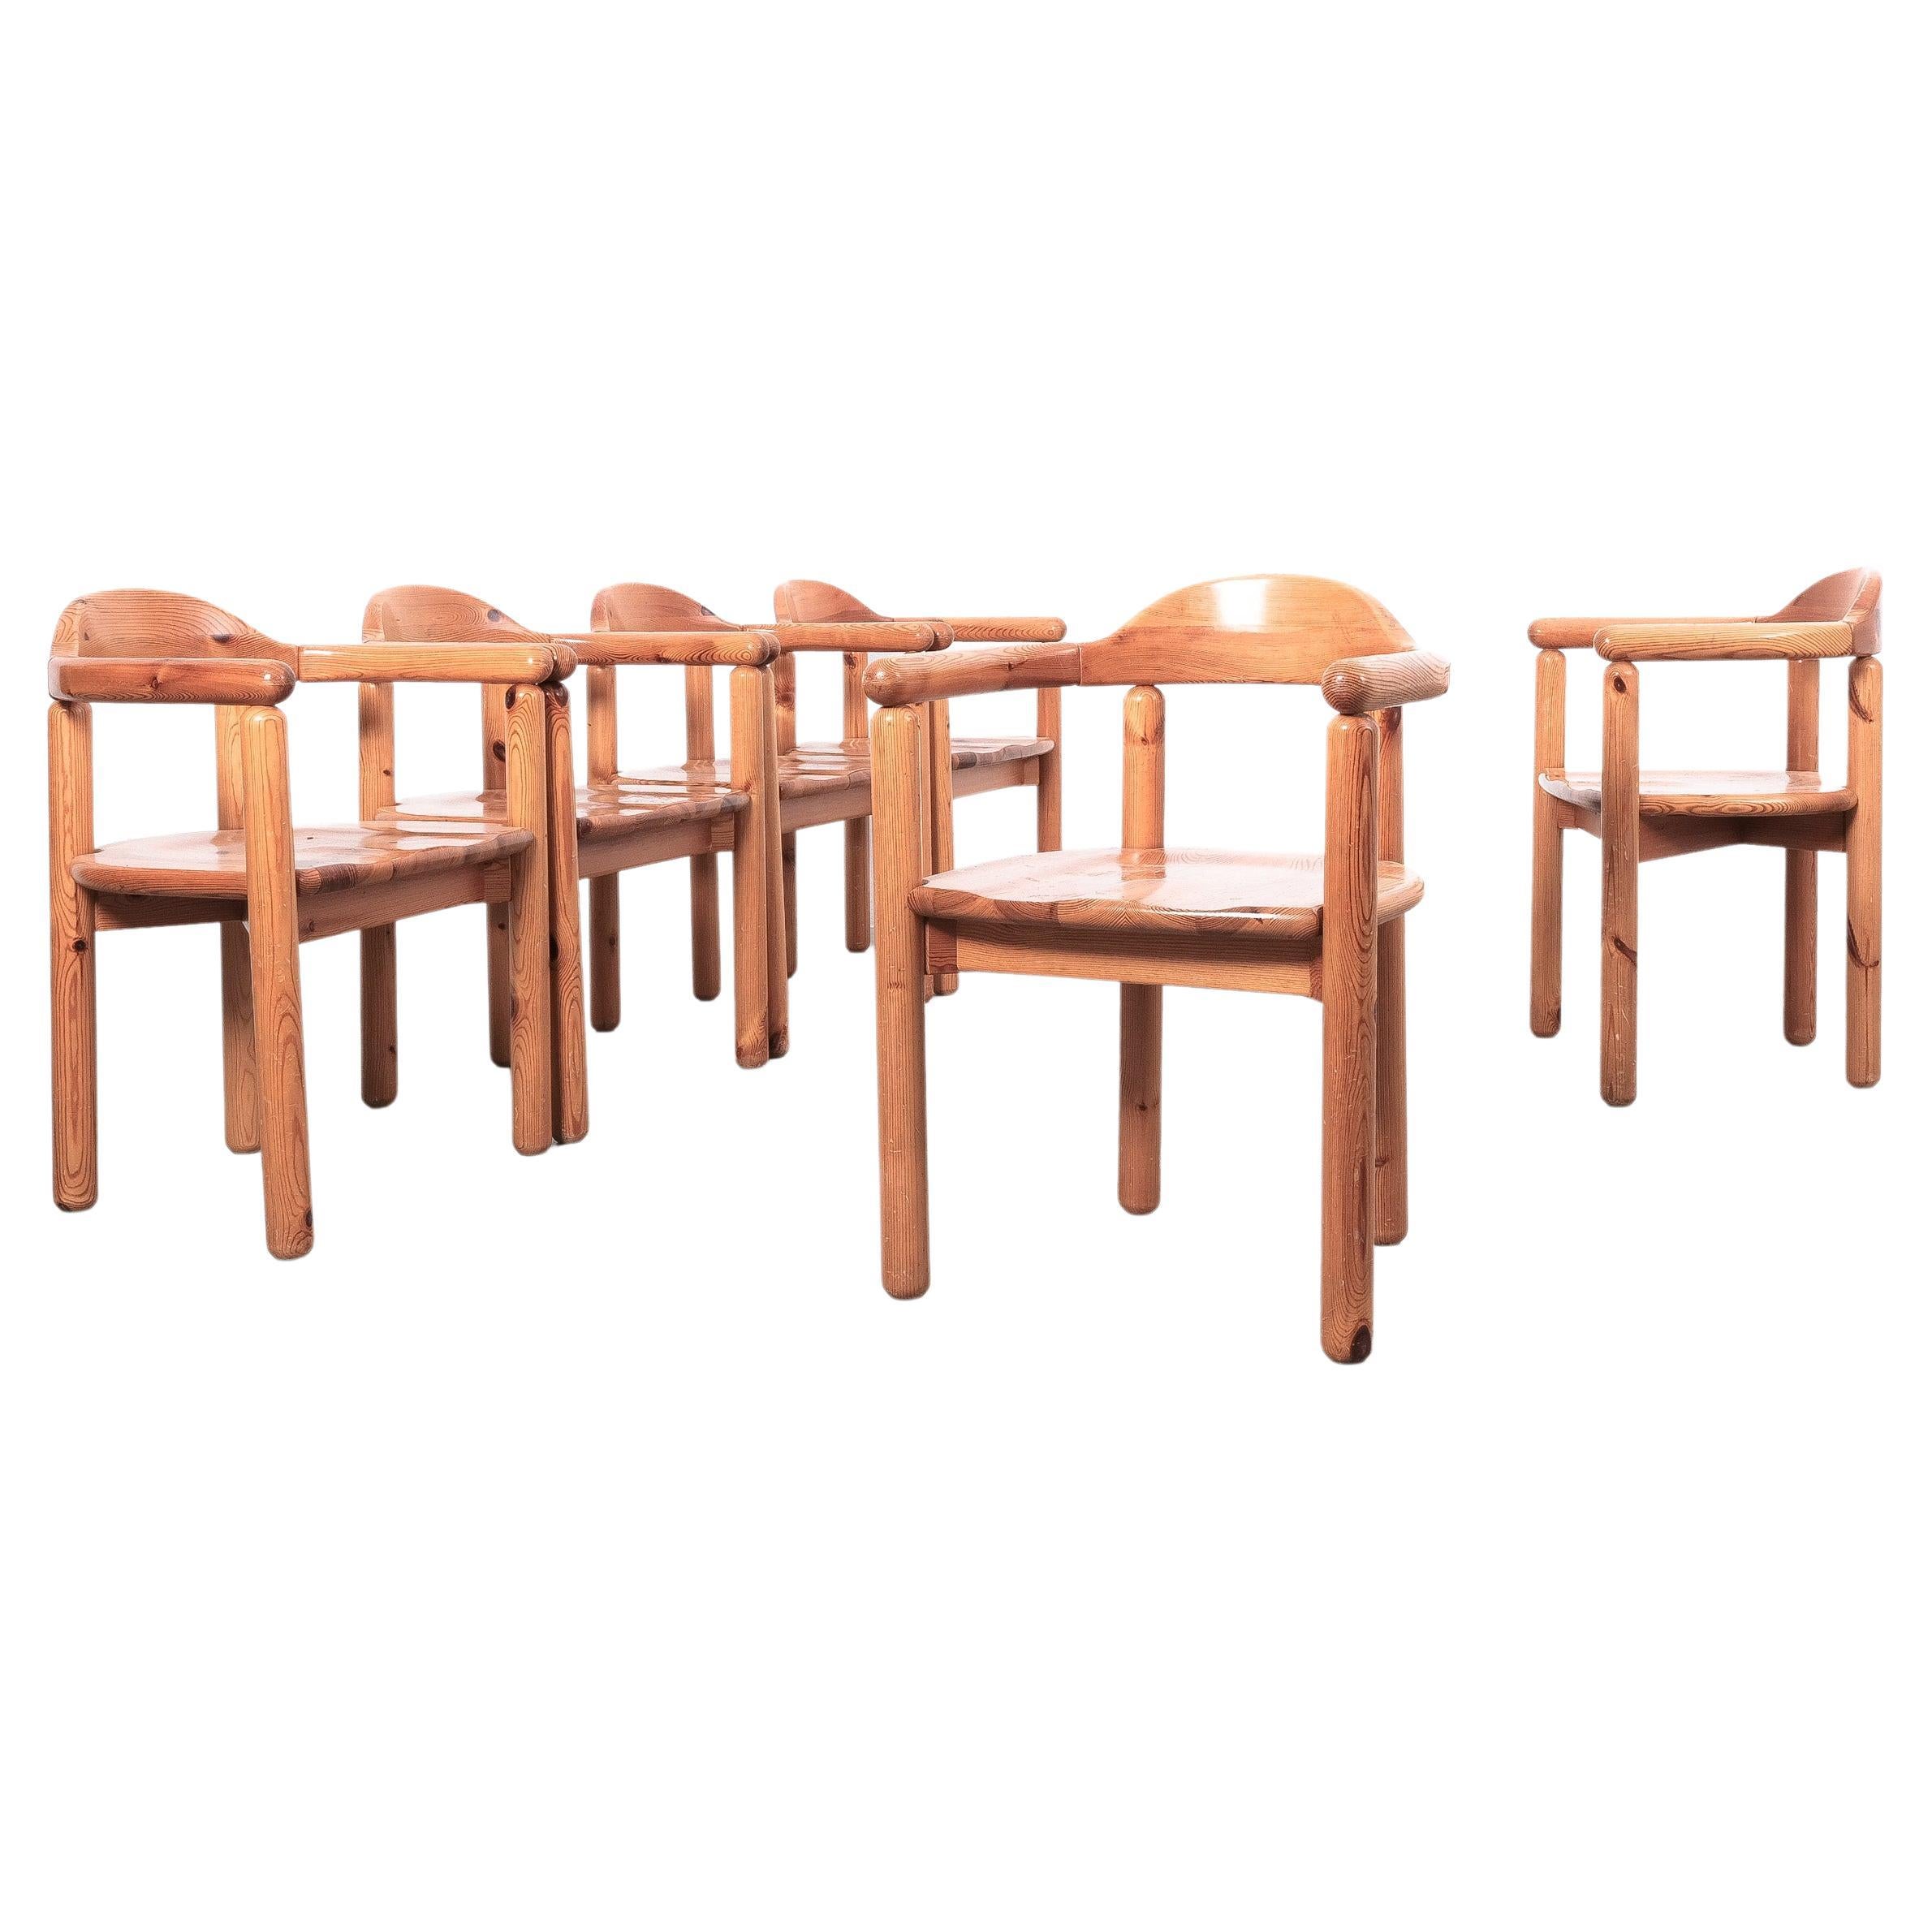 Set of six pine wood armchairs by the Danish architect Rainer Daumiller, produced by Hirtshals Sawmill during the 1970s.

Sold as a set of 6 pieces, we have another pair available that was originally used as head-chairs around the table (see